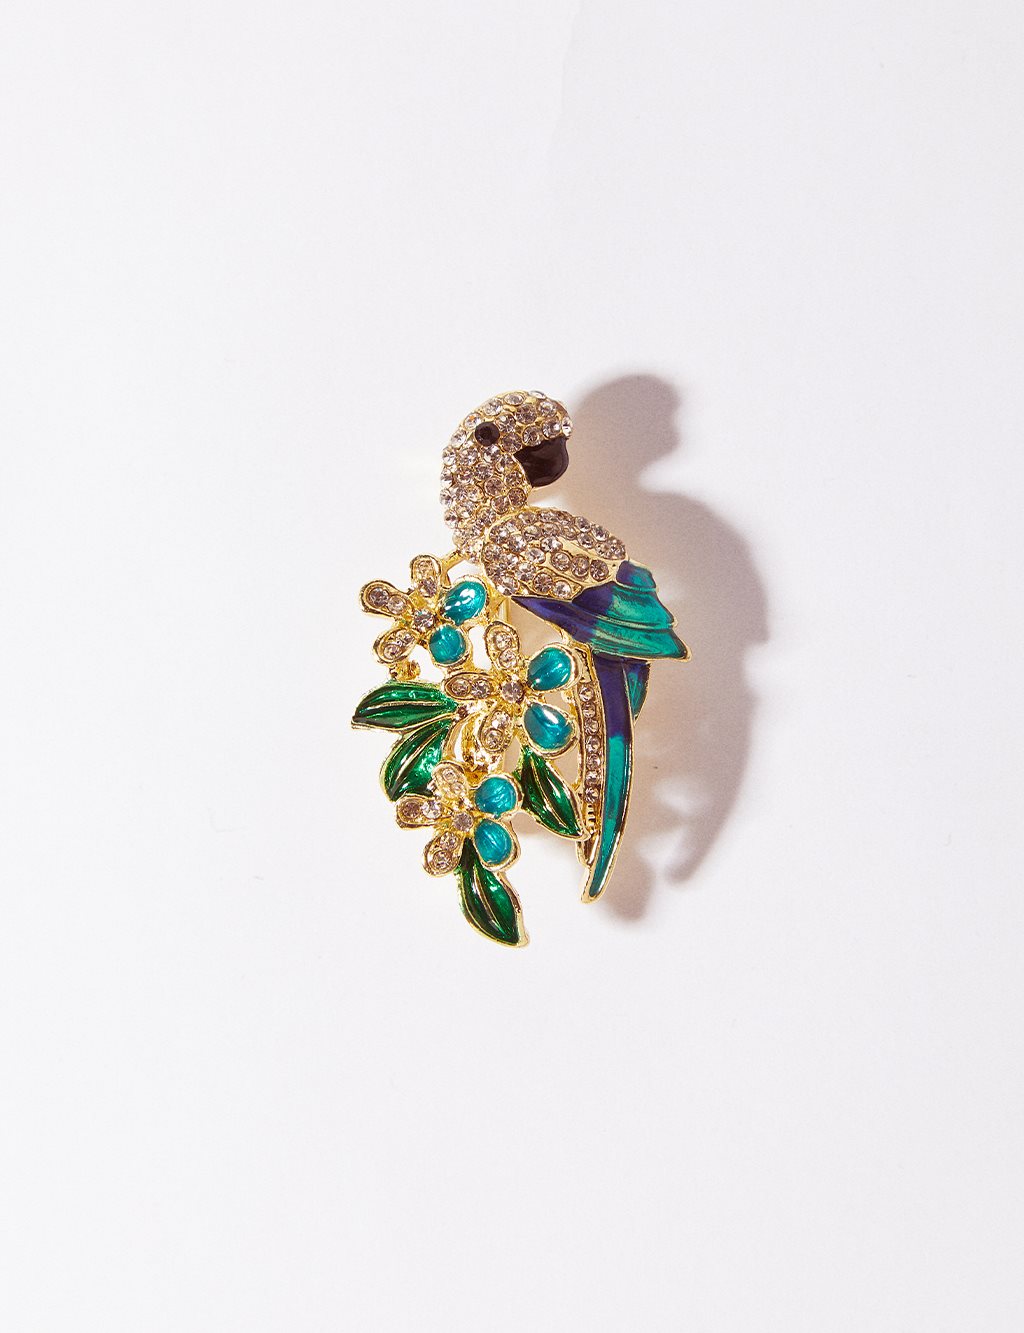 Parrot Figured Stone Brooch Gold